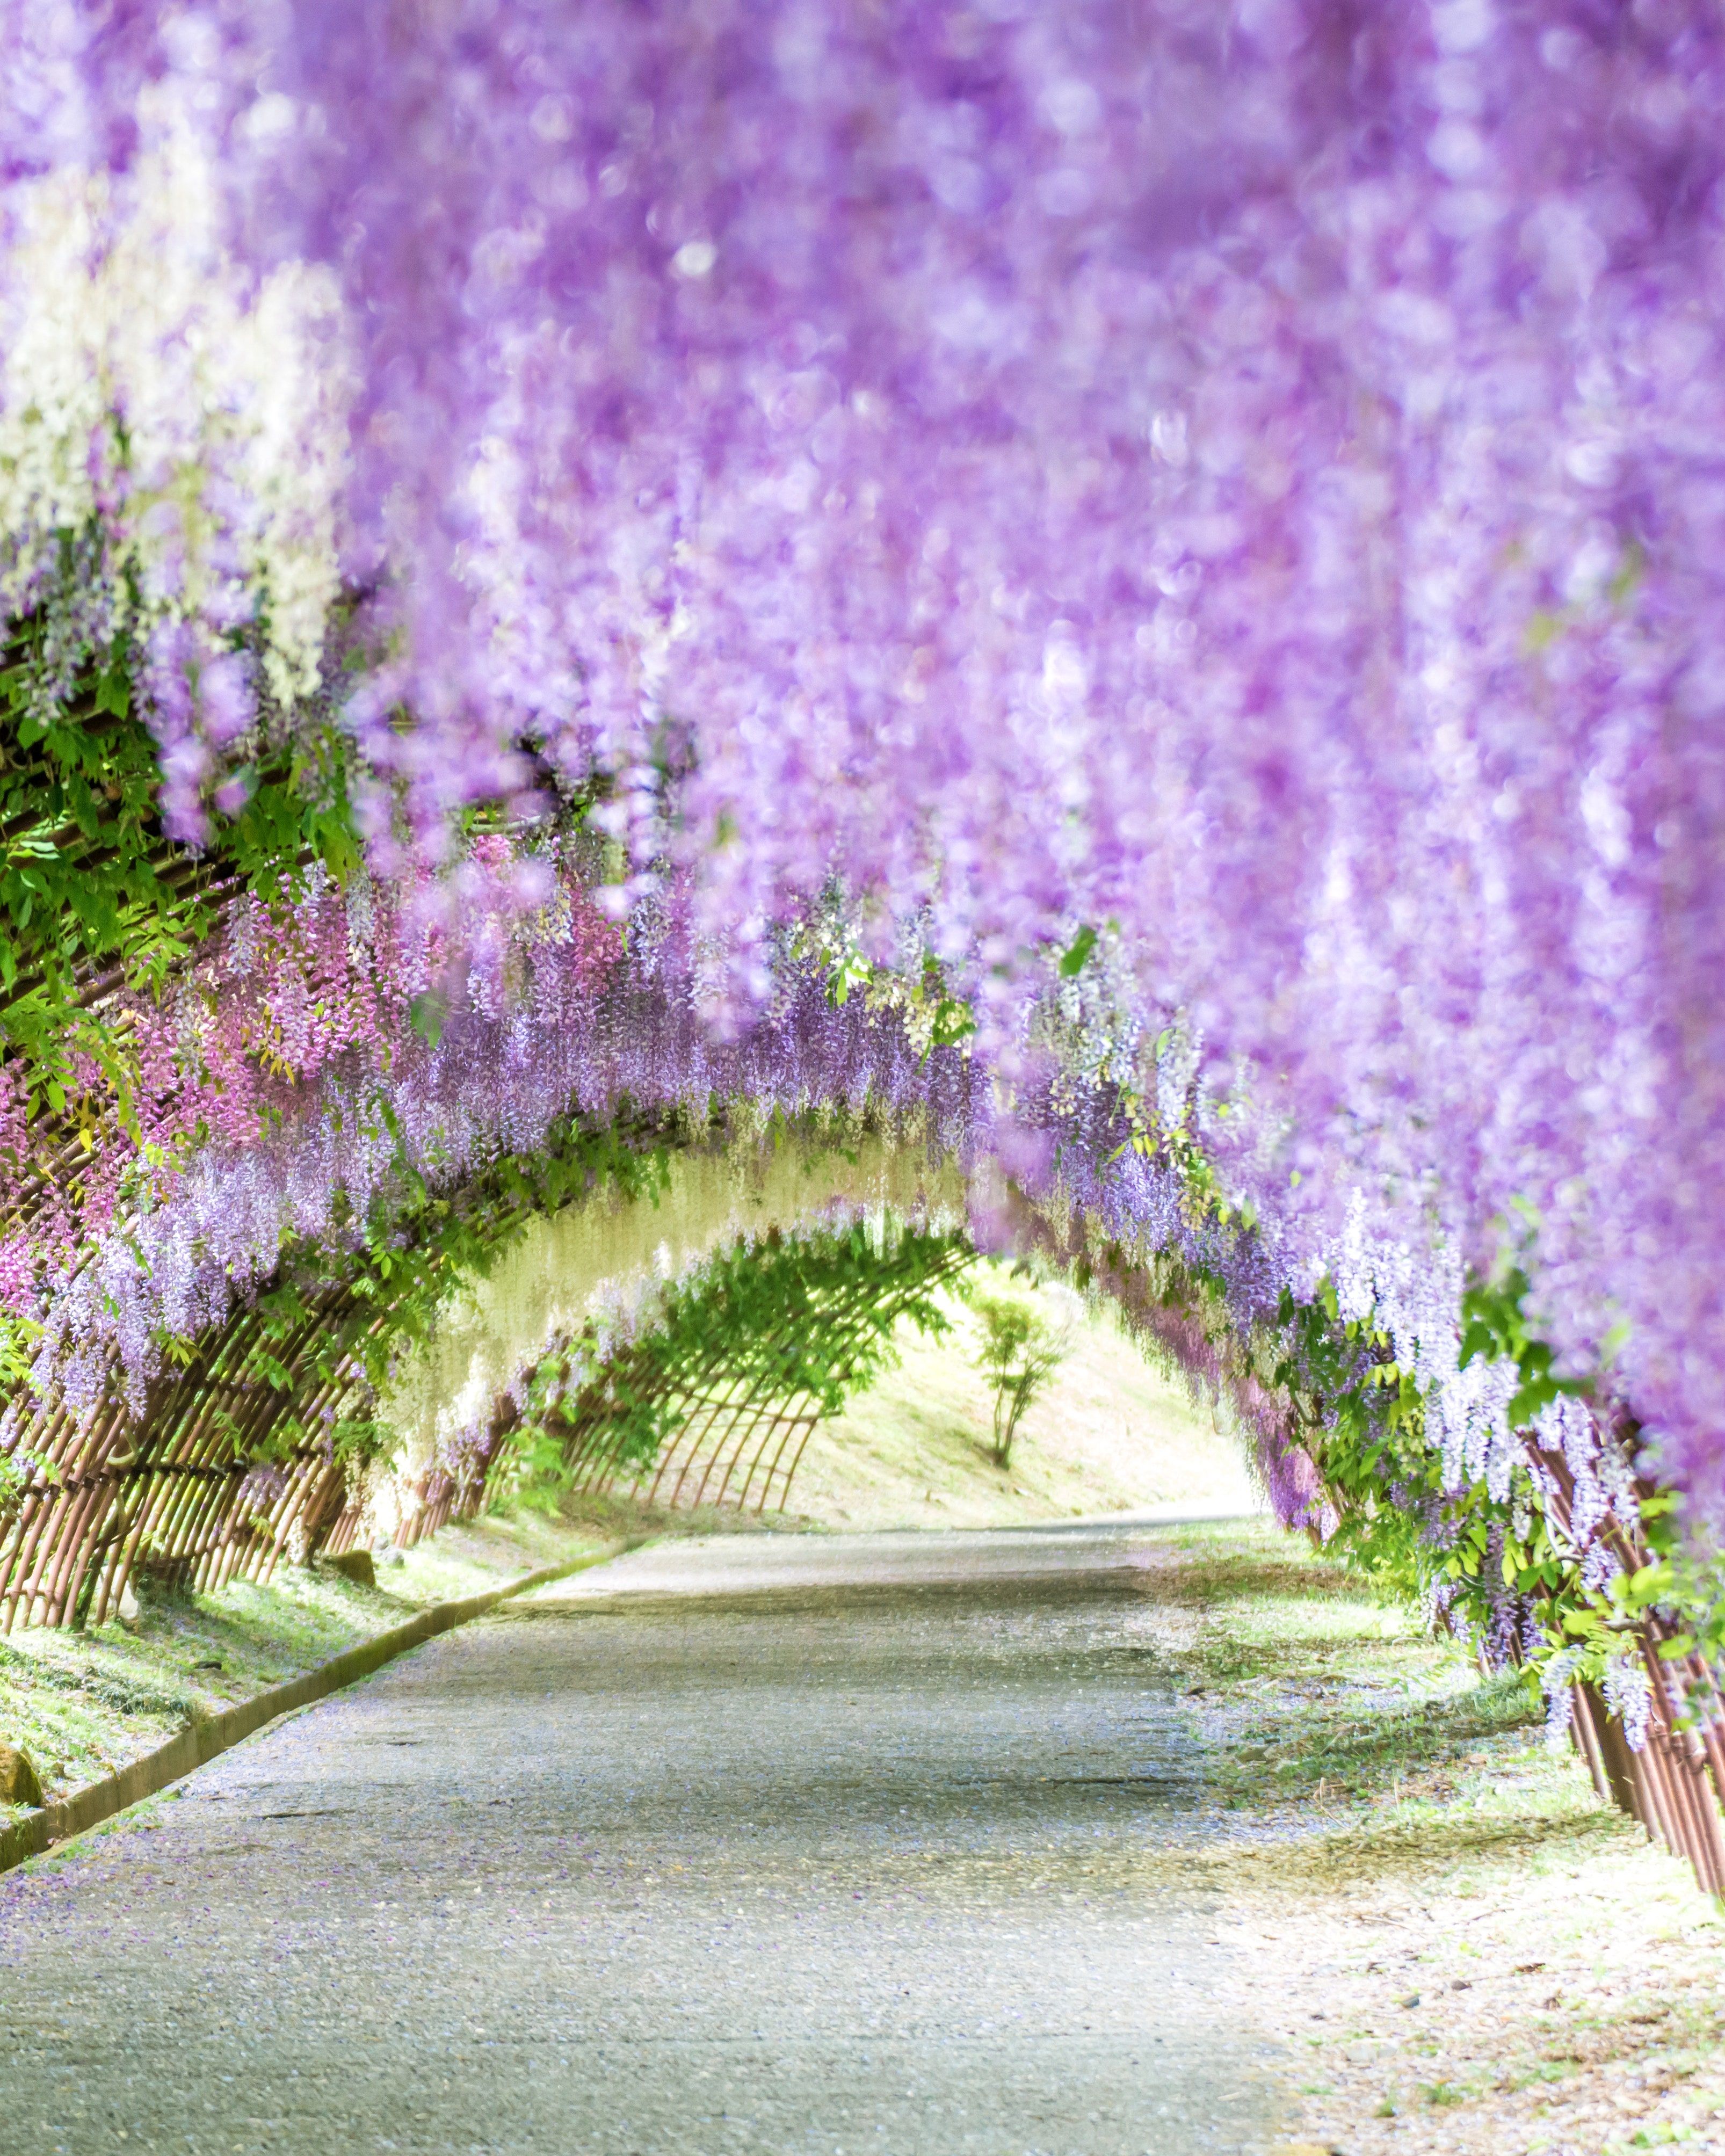 Spring Flower Picture from Around the World. Condé Nast Traveler